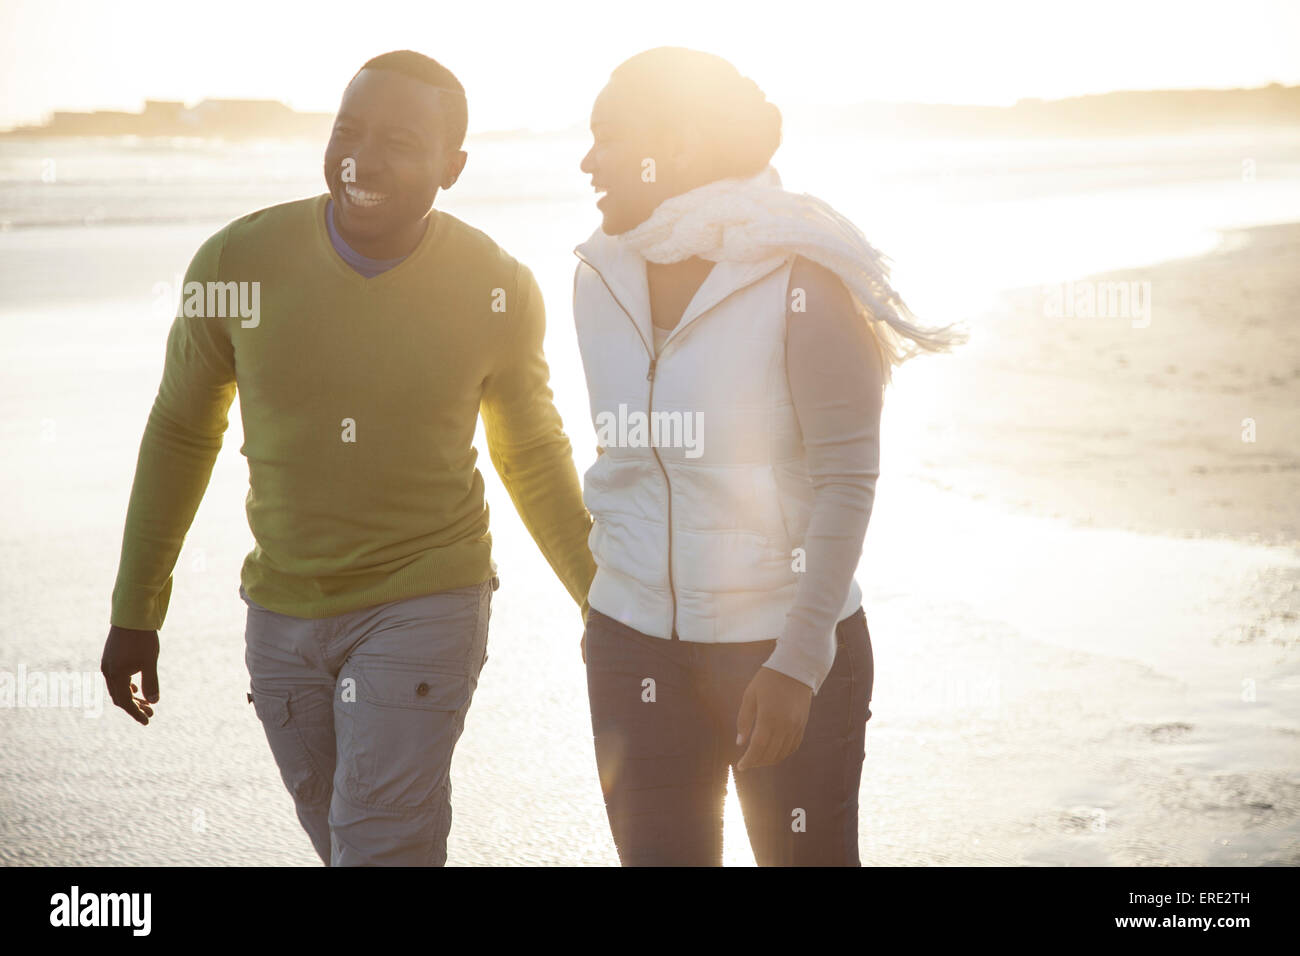 Smiling couple walking on beach Banque D'Images